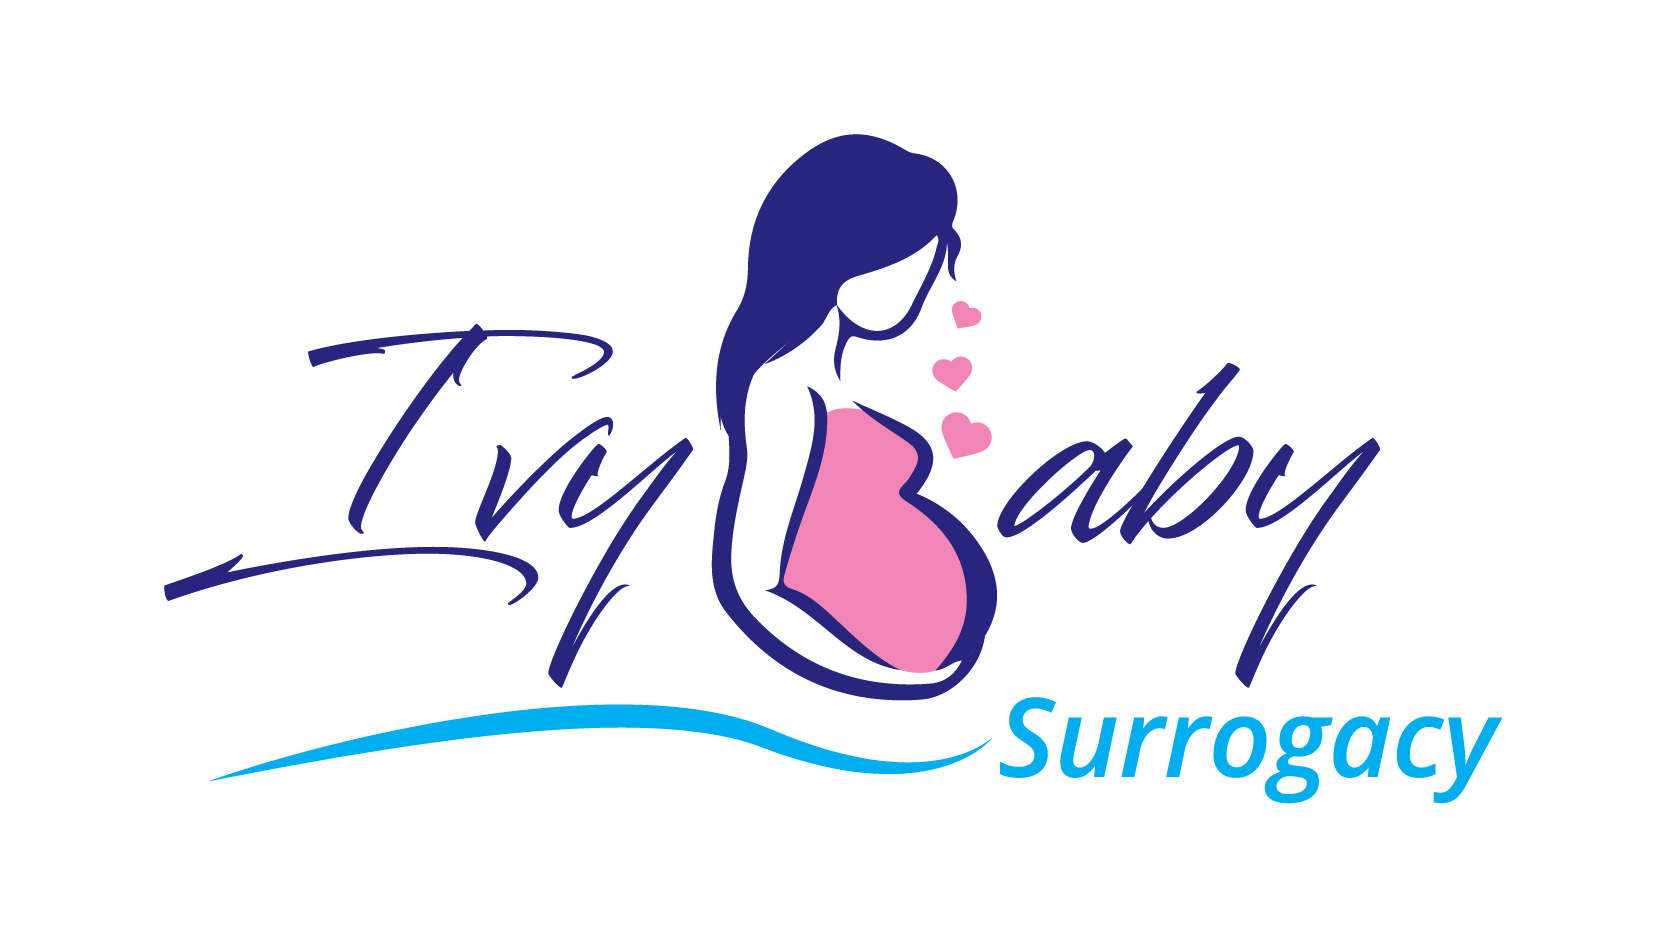 A LIFE CHANGING EXPERIENCE FOR SURROGATES